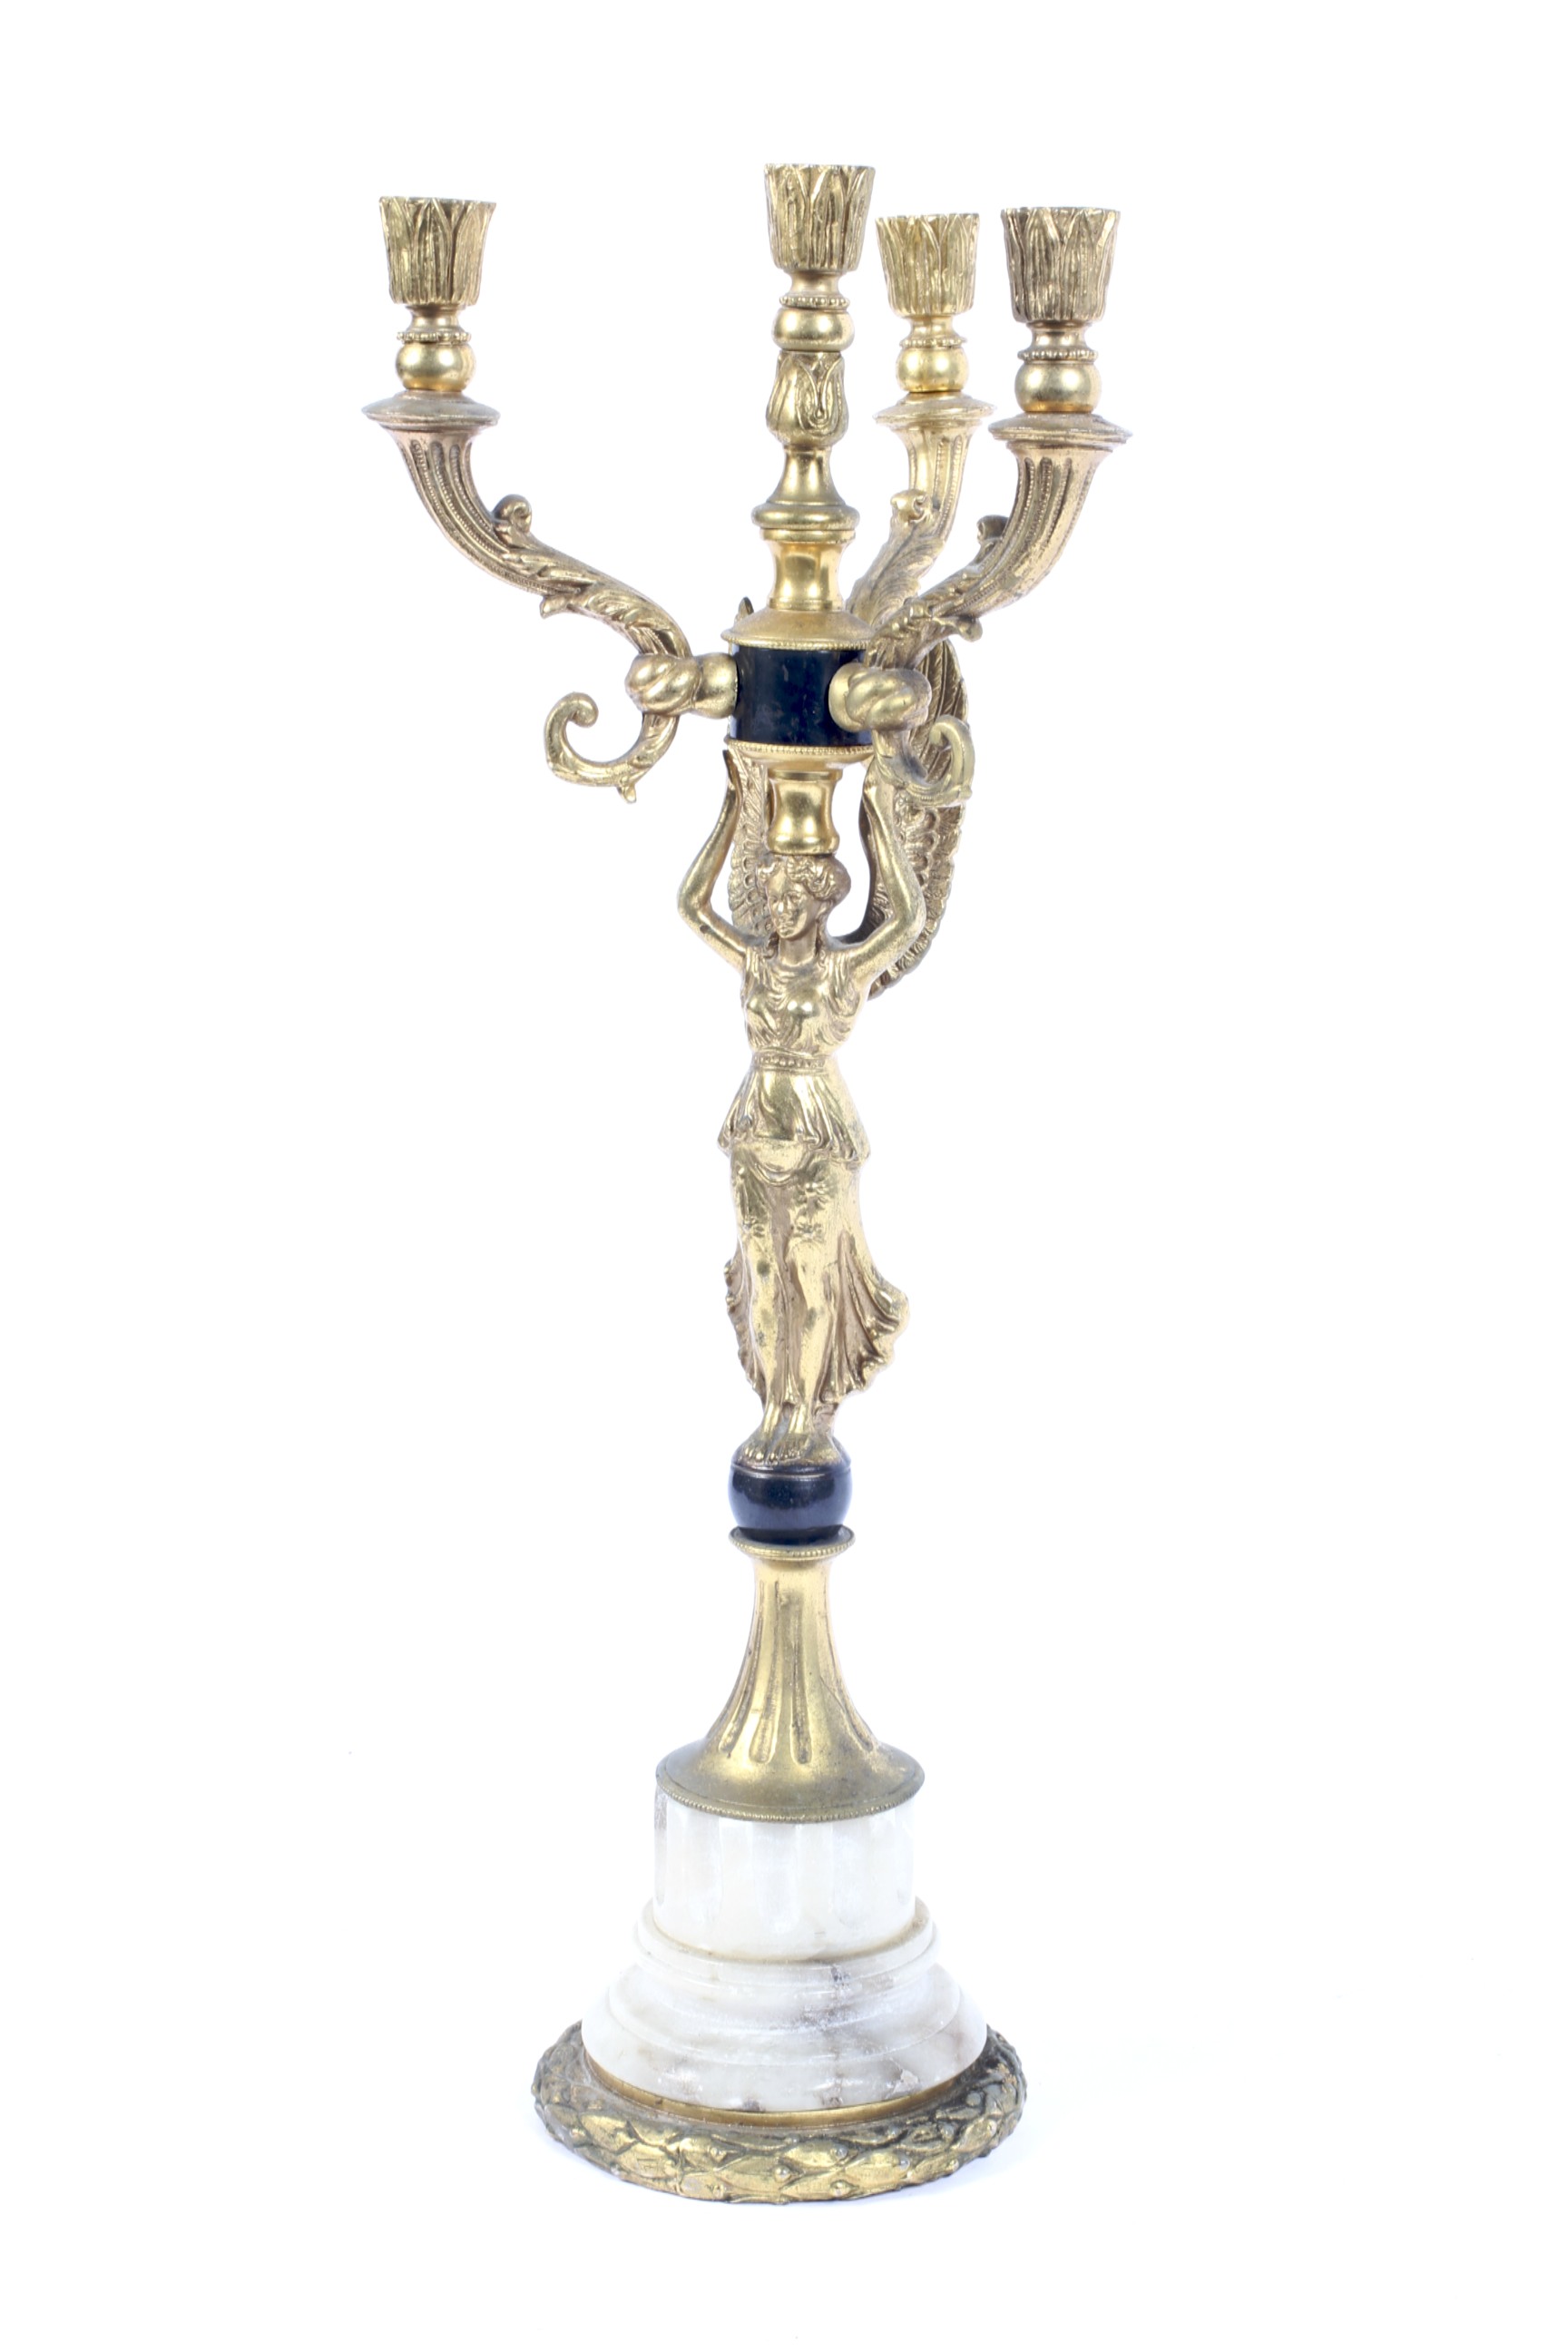 An early 20th century Empire style gilt-metal mounted four-light candelabra.